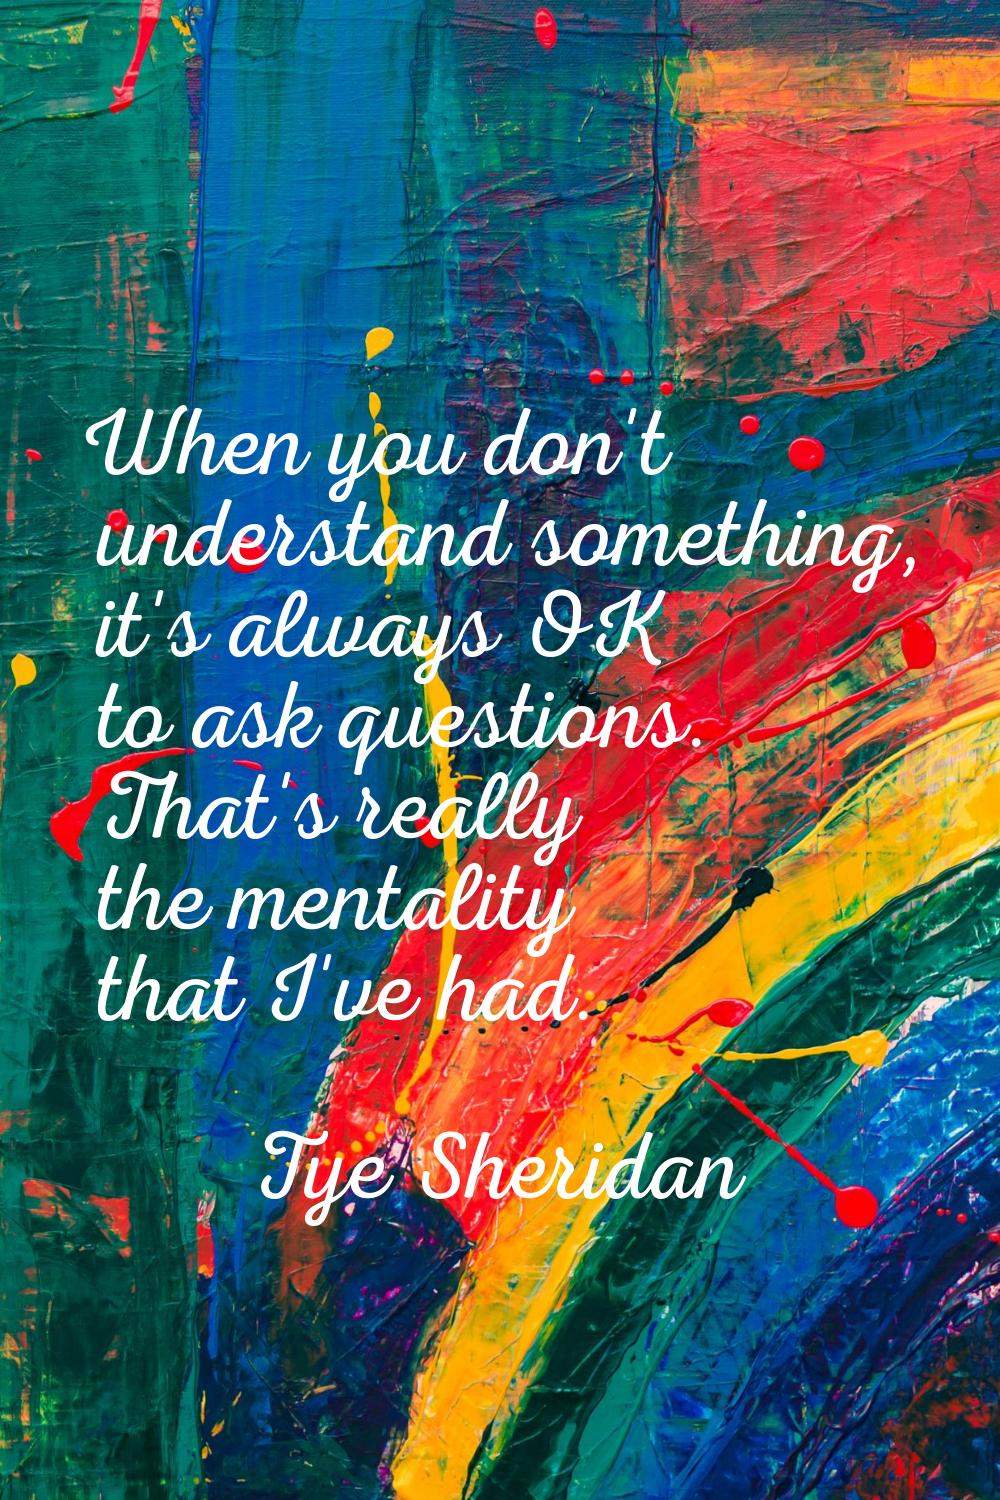 When you don't understand something, it's always OK to ask questions. That's really the mentality t